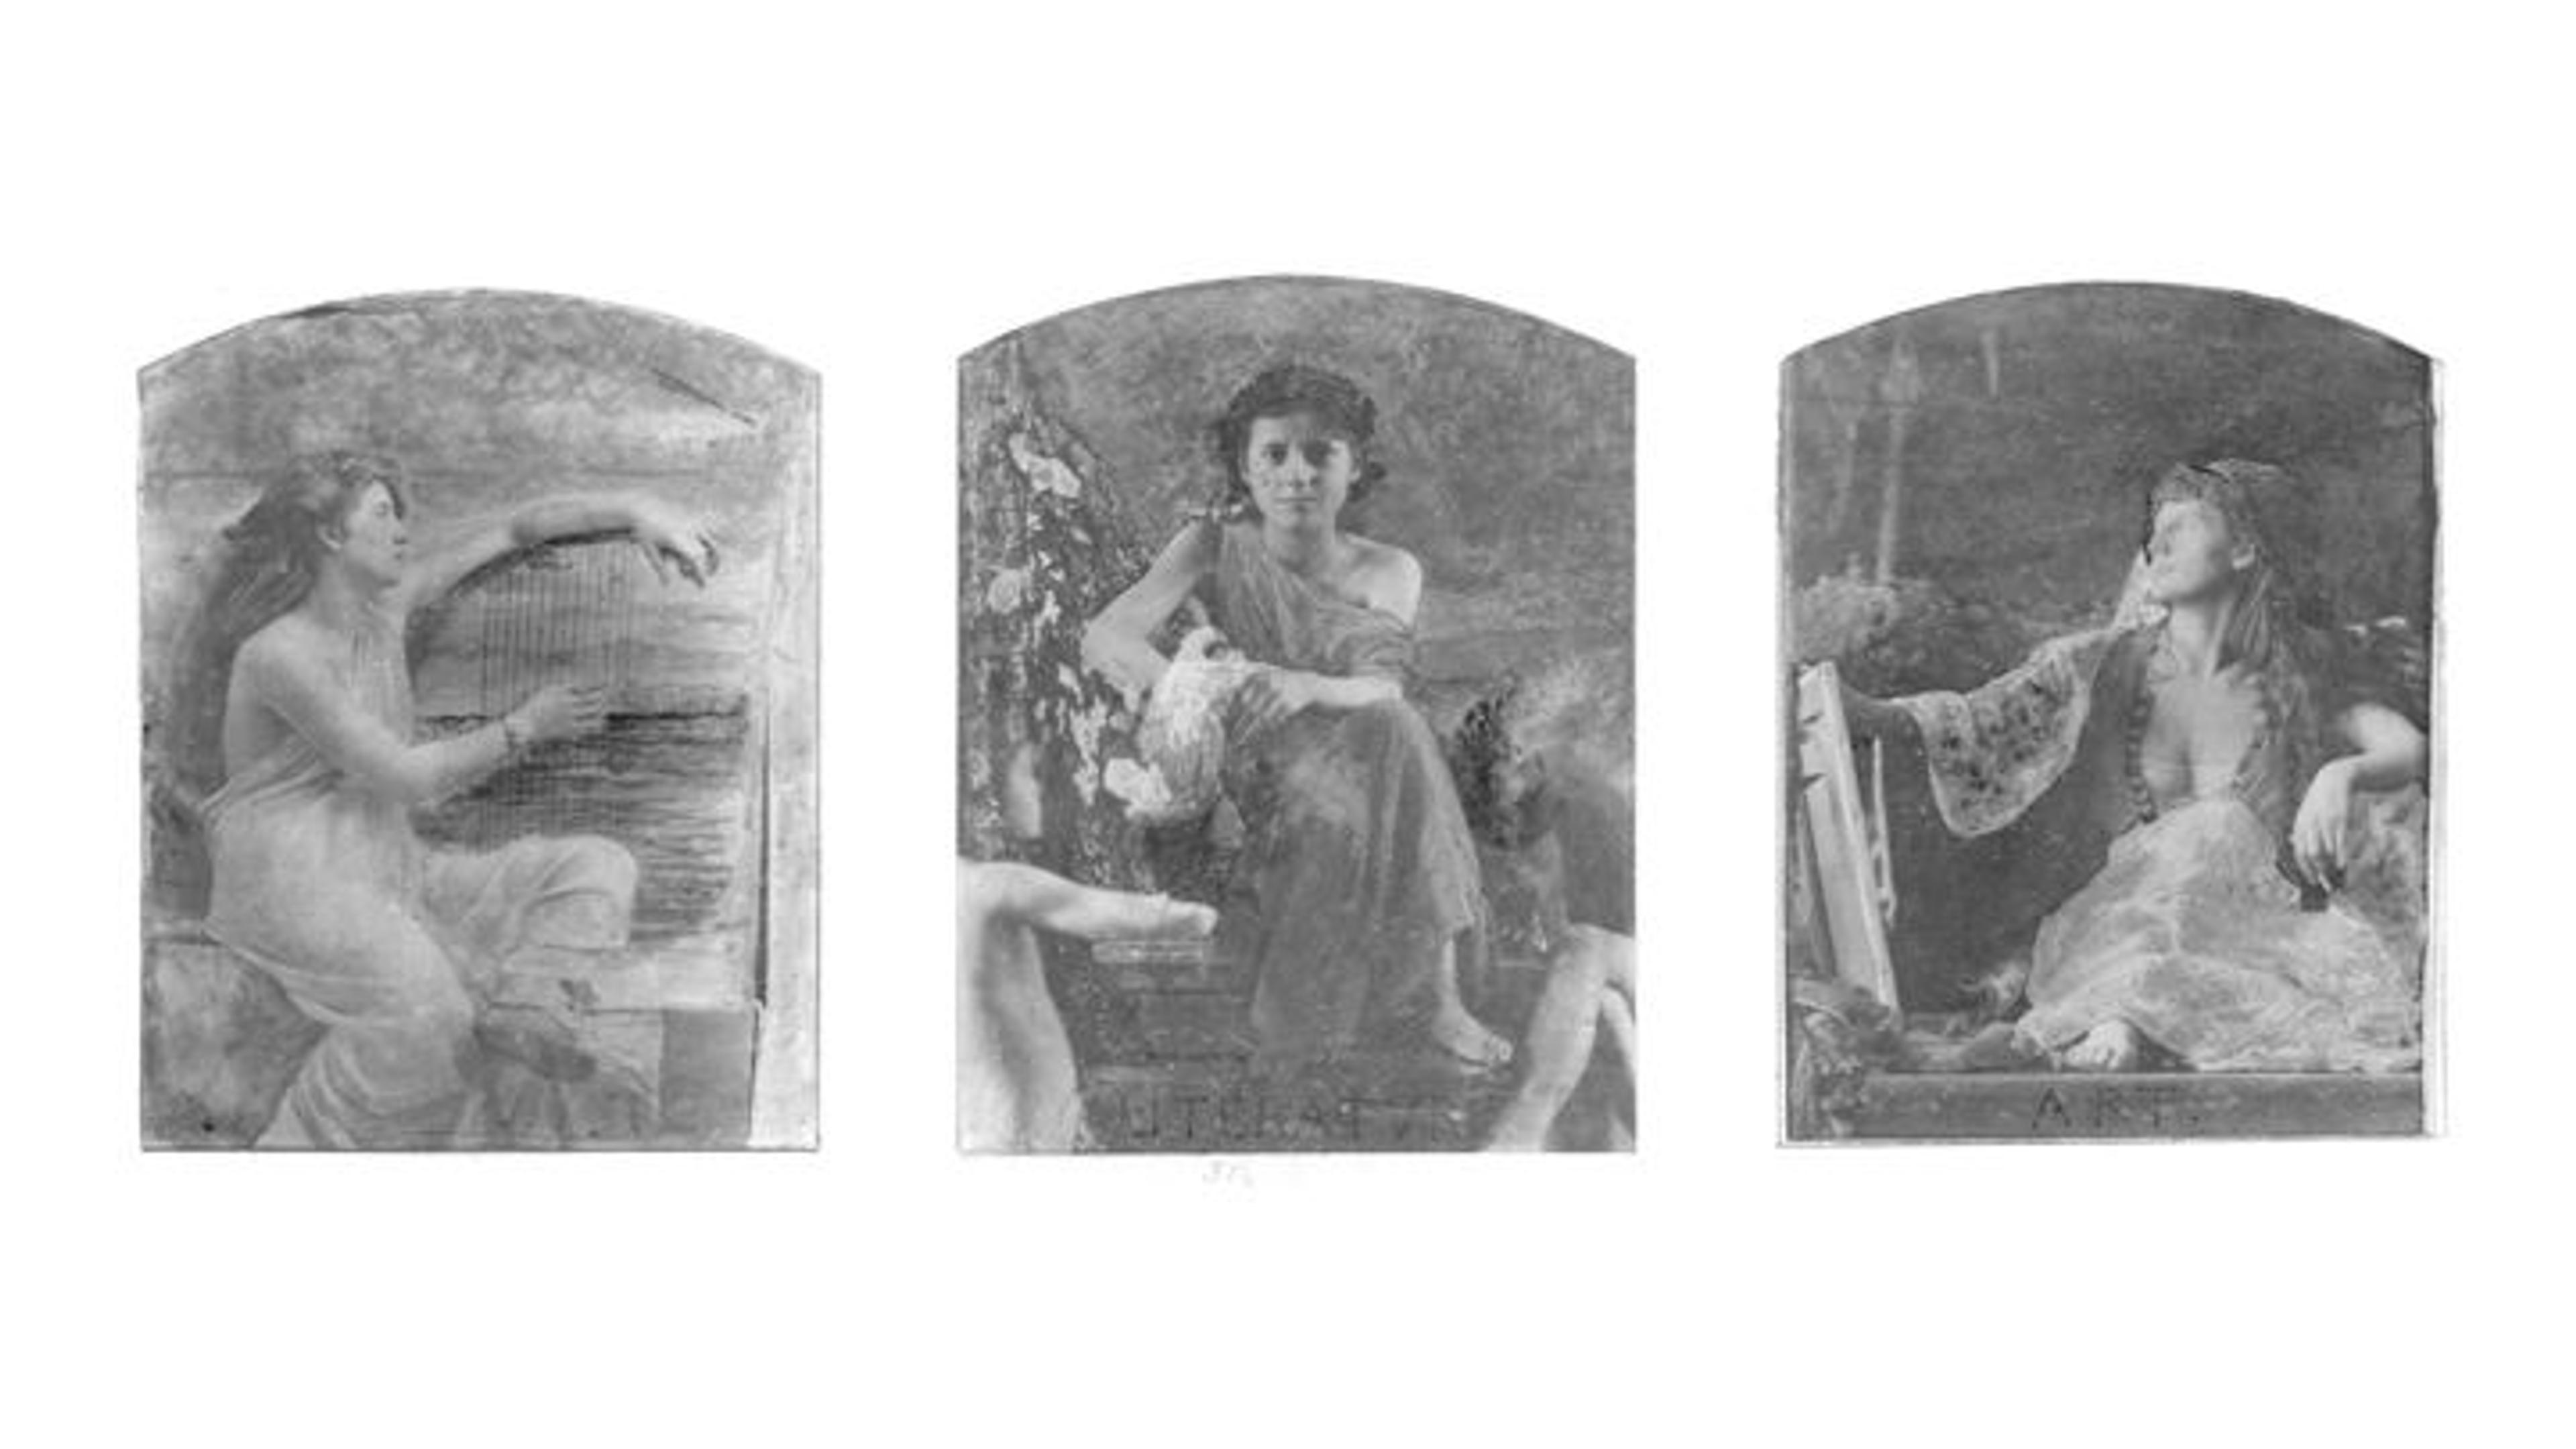 An infrared scan of the Louis Comfort Tiffany triptych